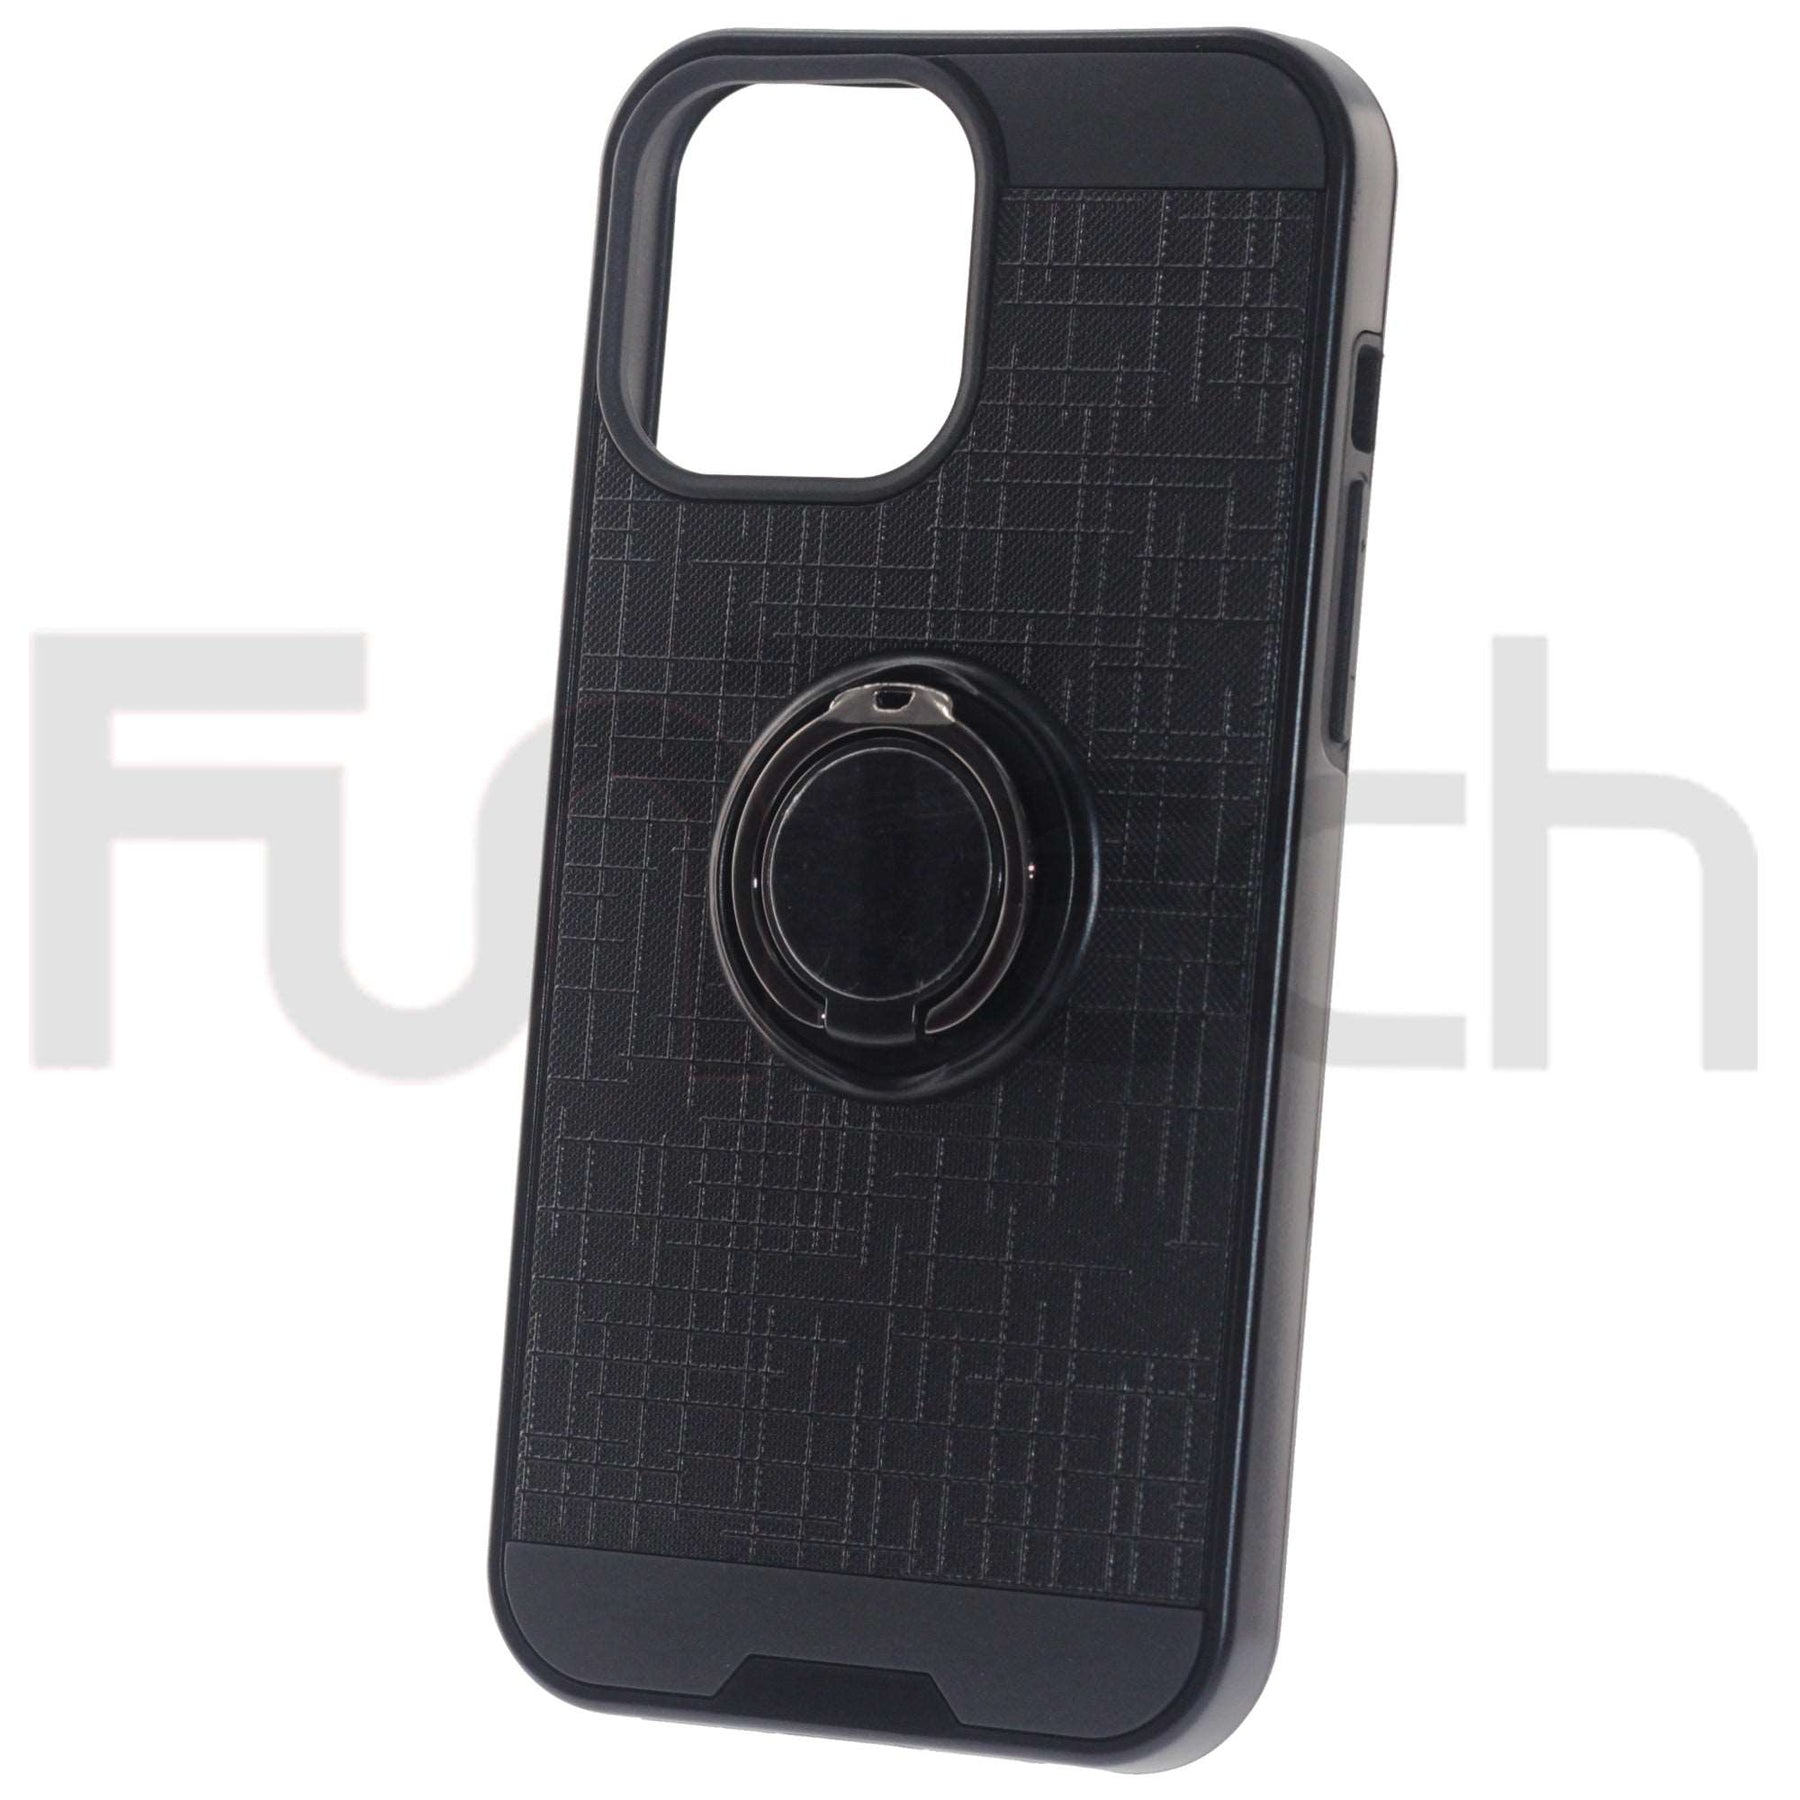  Apple iPhone 13 Pro Max, Ring Armor Case, Color Black.